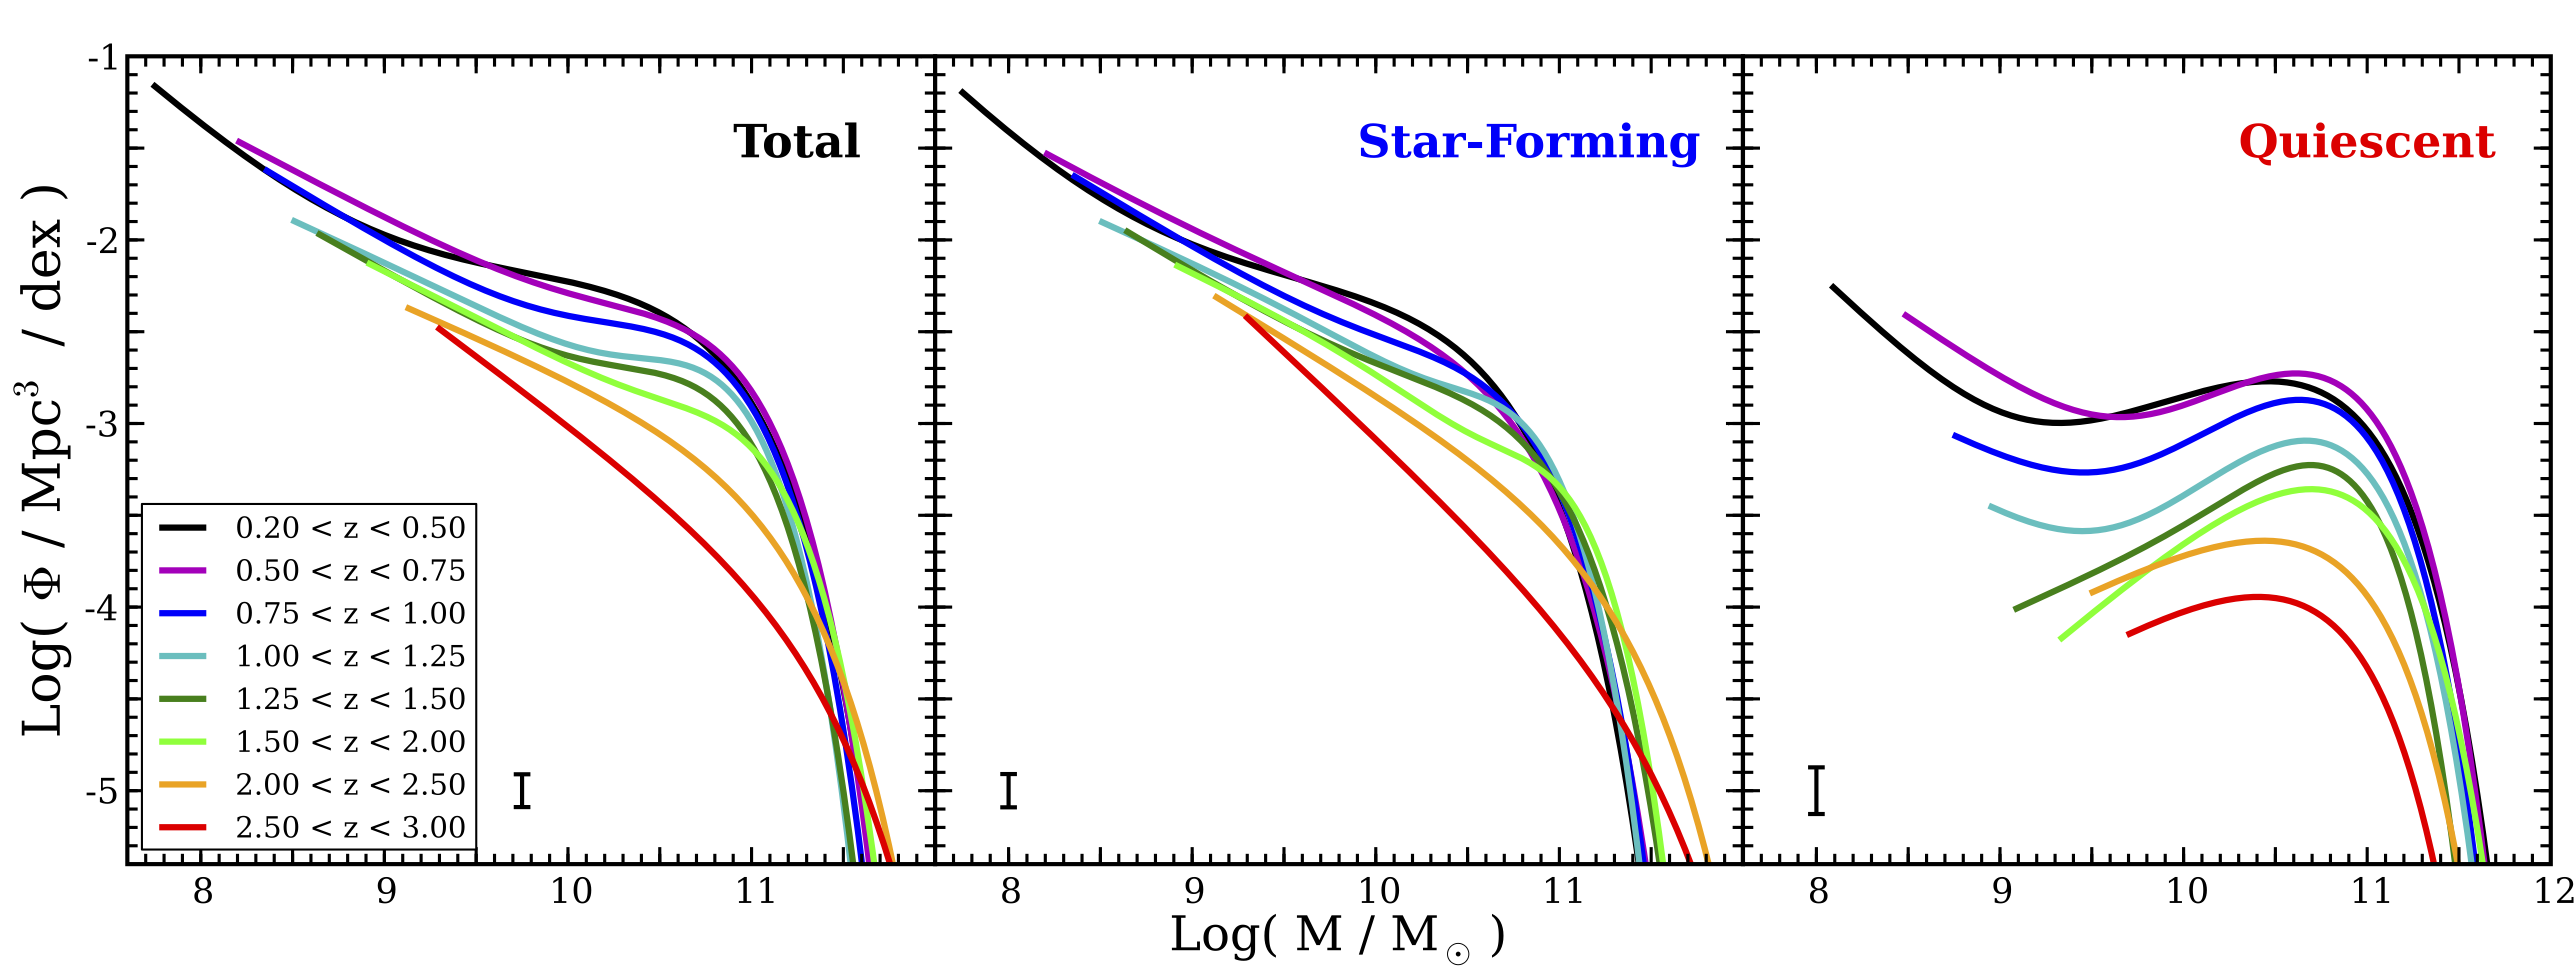 Stellar mass functions of all (left), star-forming (middle) and quiescent (right) galaxies.